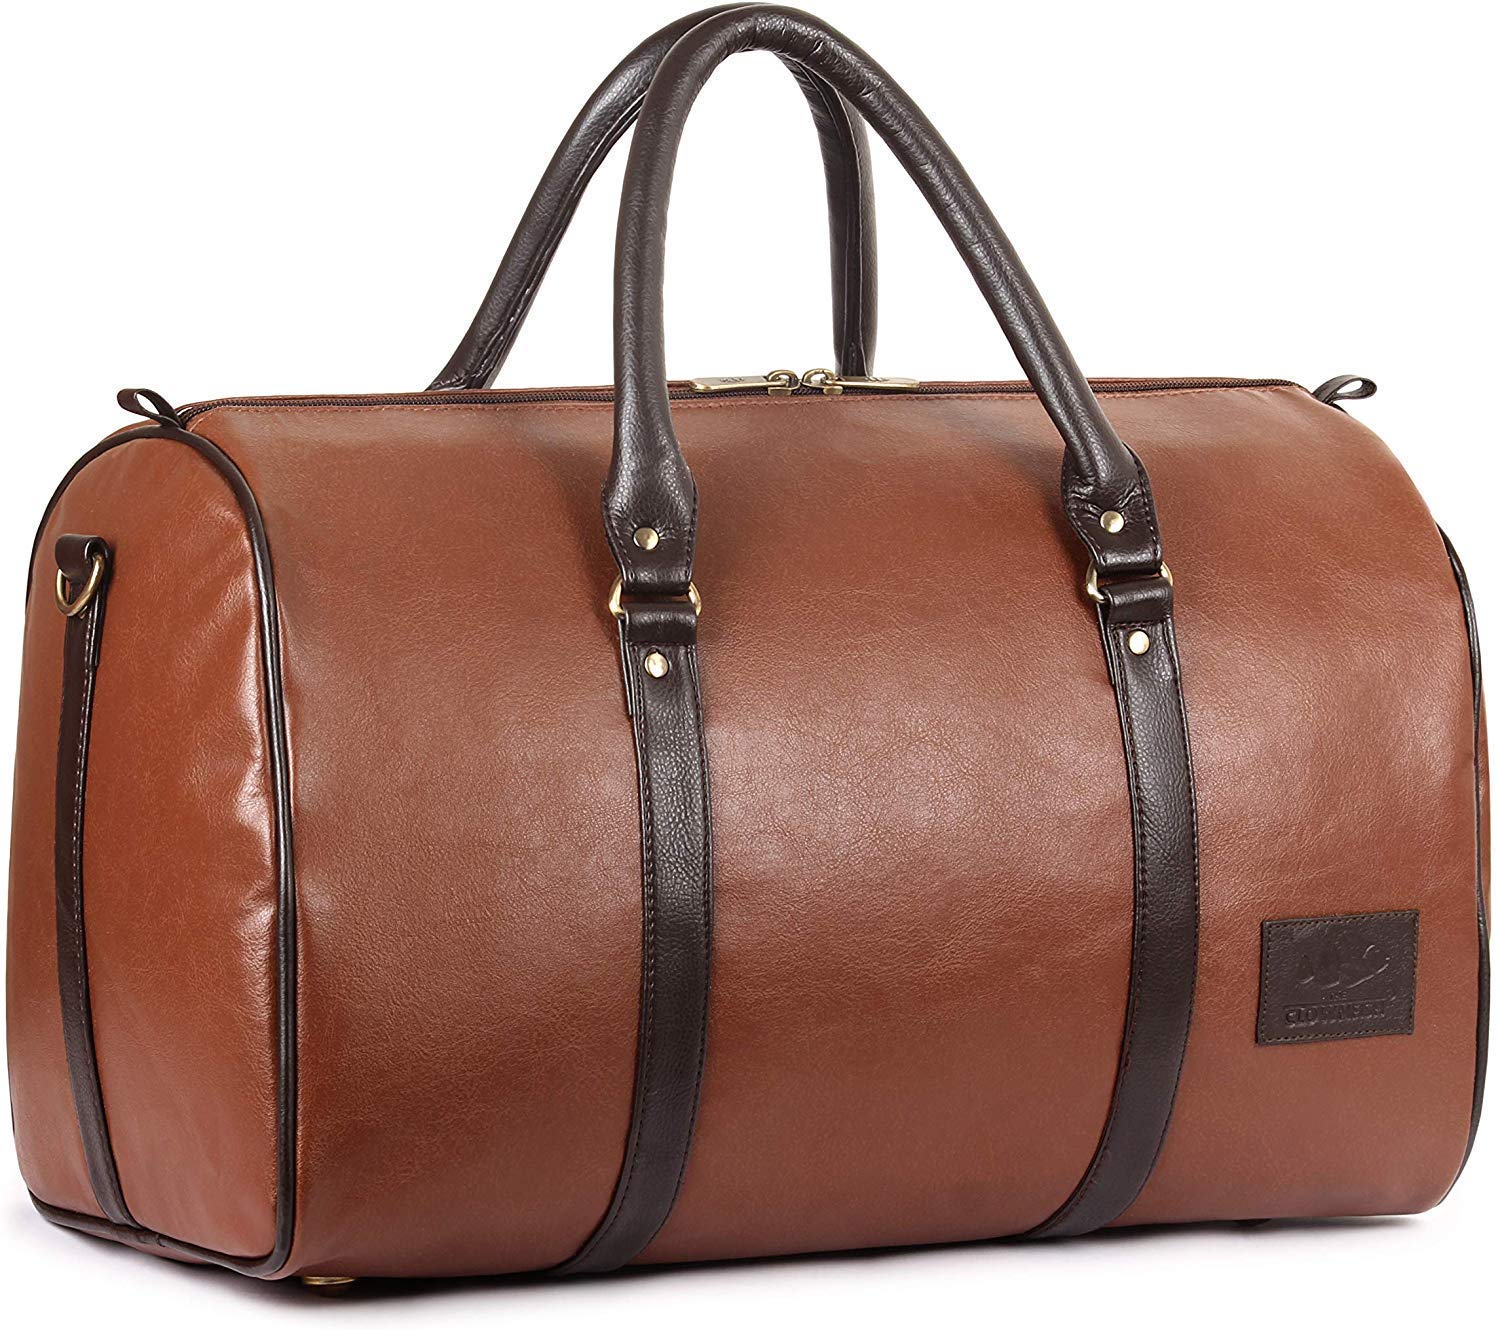 The Clownfish Browny 36 liters Faux Leather Travel Duffle Bag Men Travel Duffel Bag Luggage Daffel Bags Air Bags Luggage Bag Travelling Bag Truffle Bags (Rust Brown)